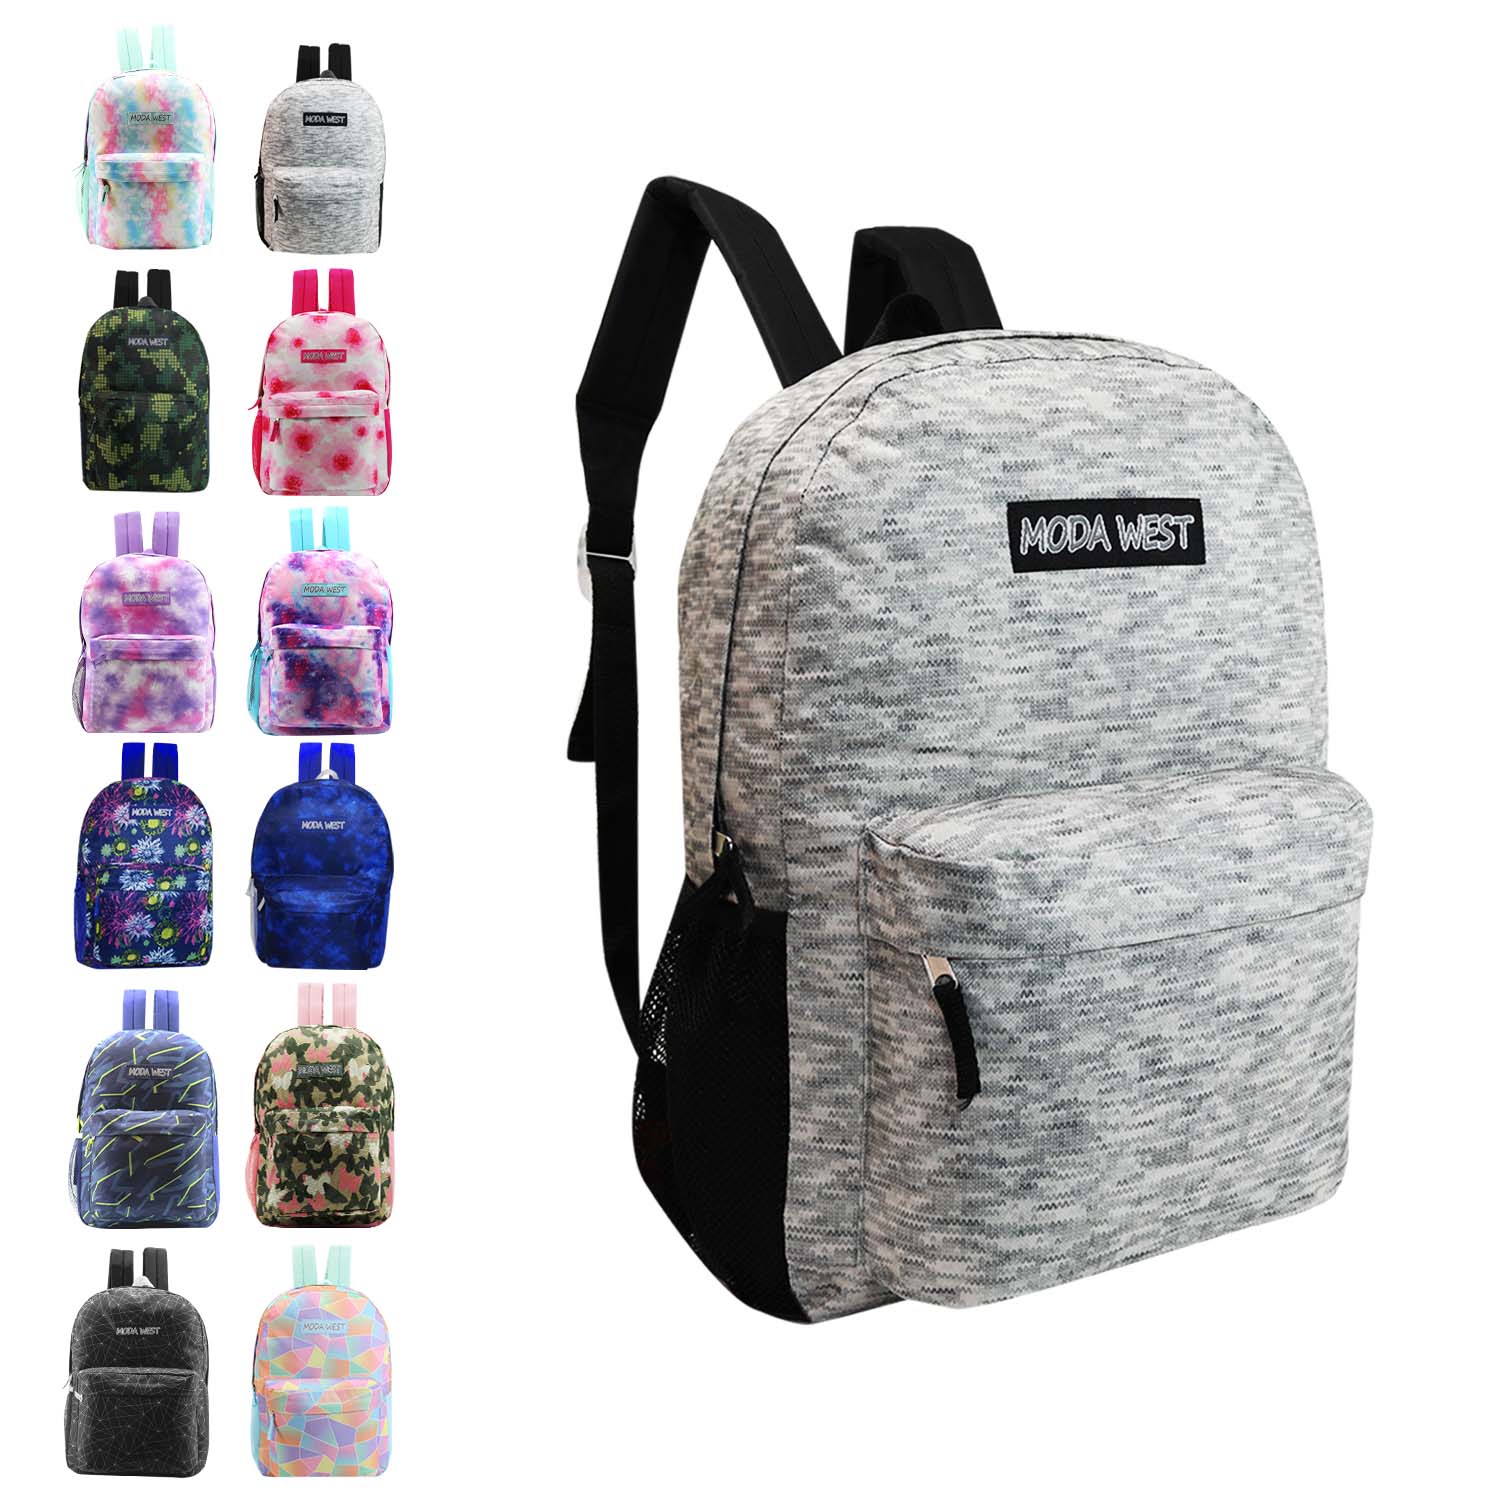 17" Classic Wholesale Backpack in Assorted Prints - Bulk Case of 24